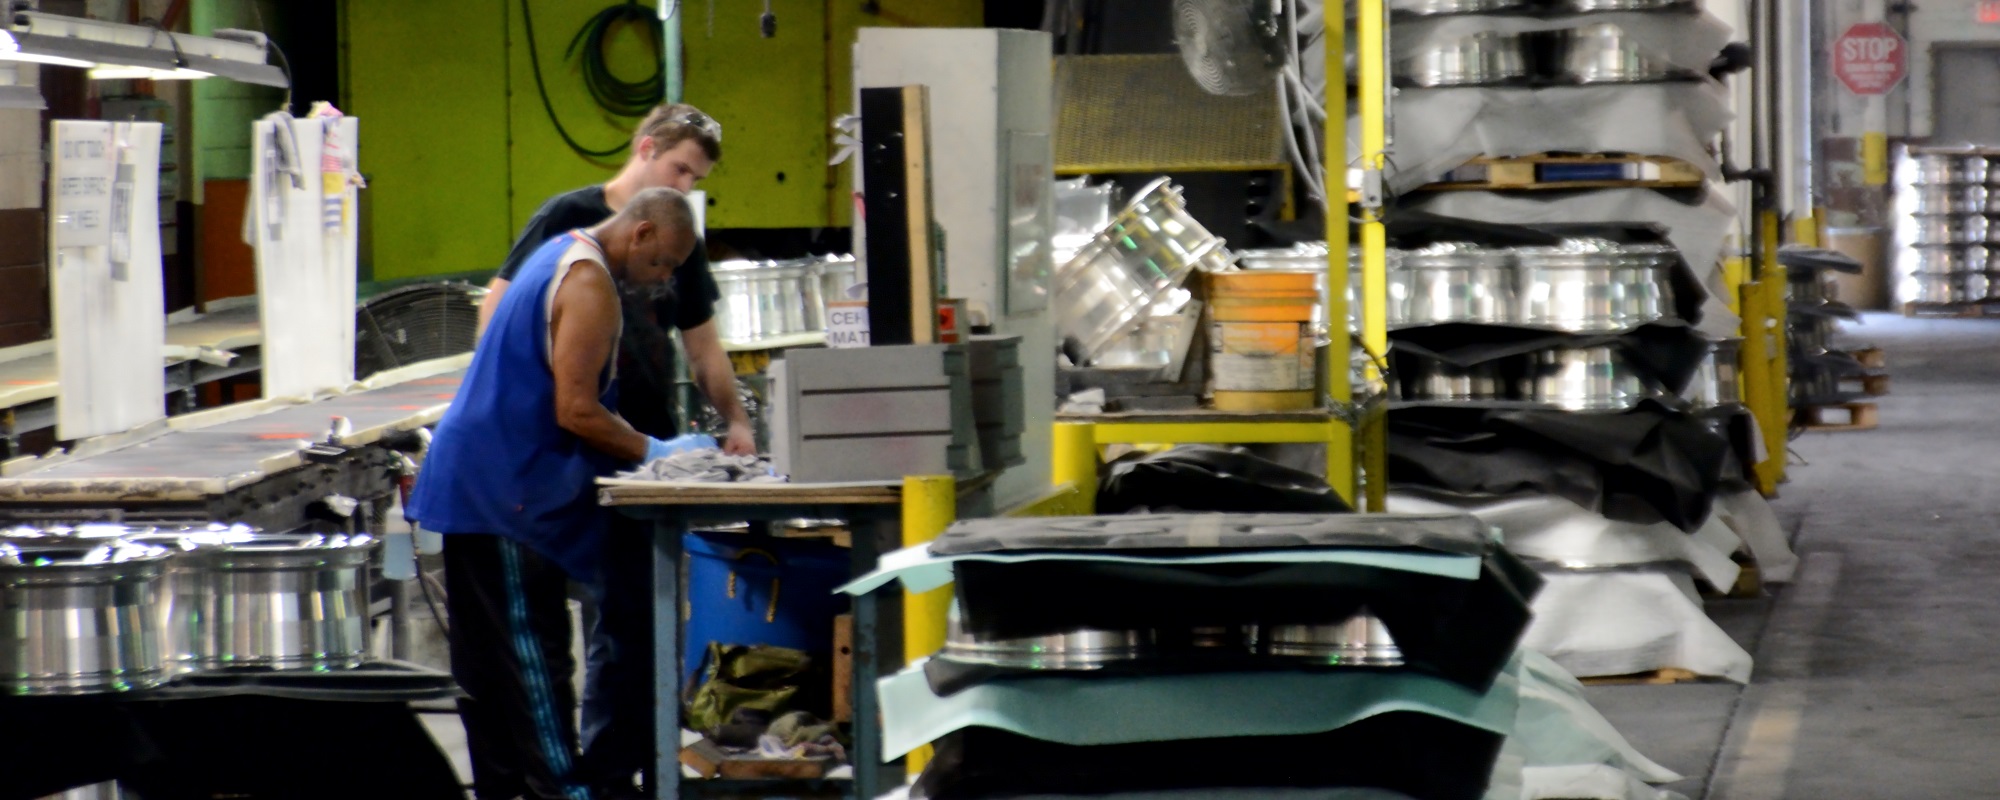 AMT employees working together in manufacturing facility